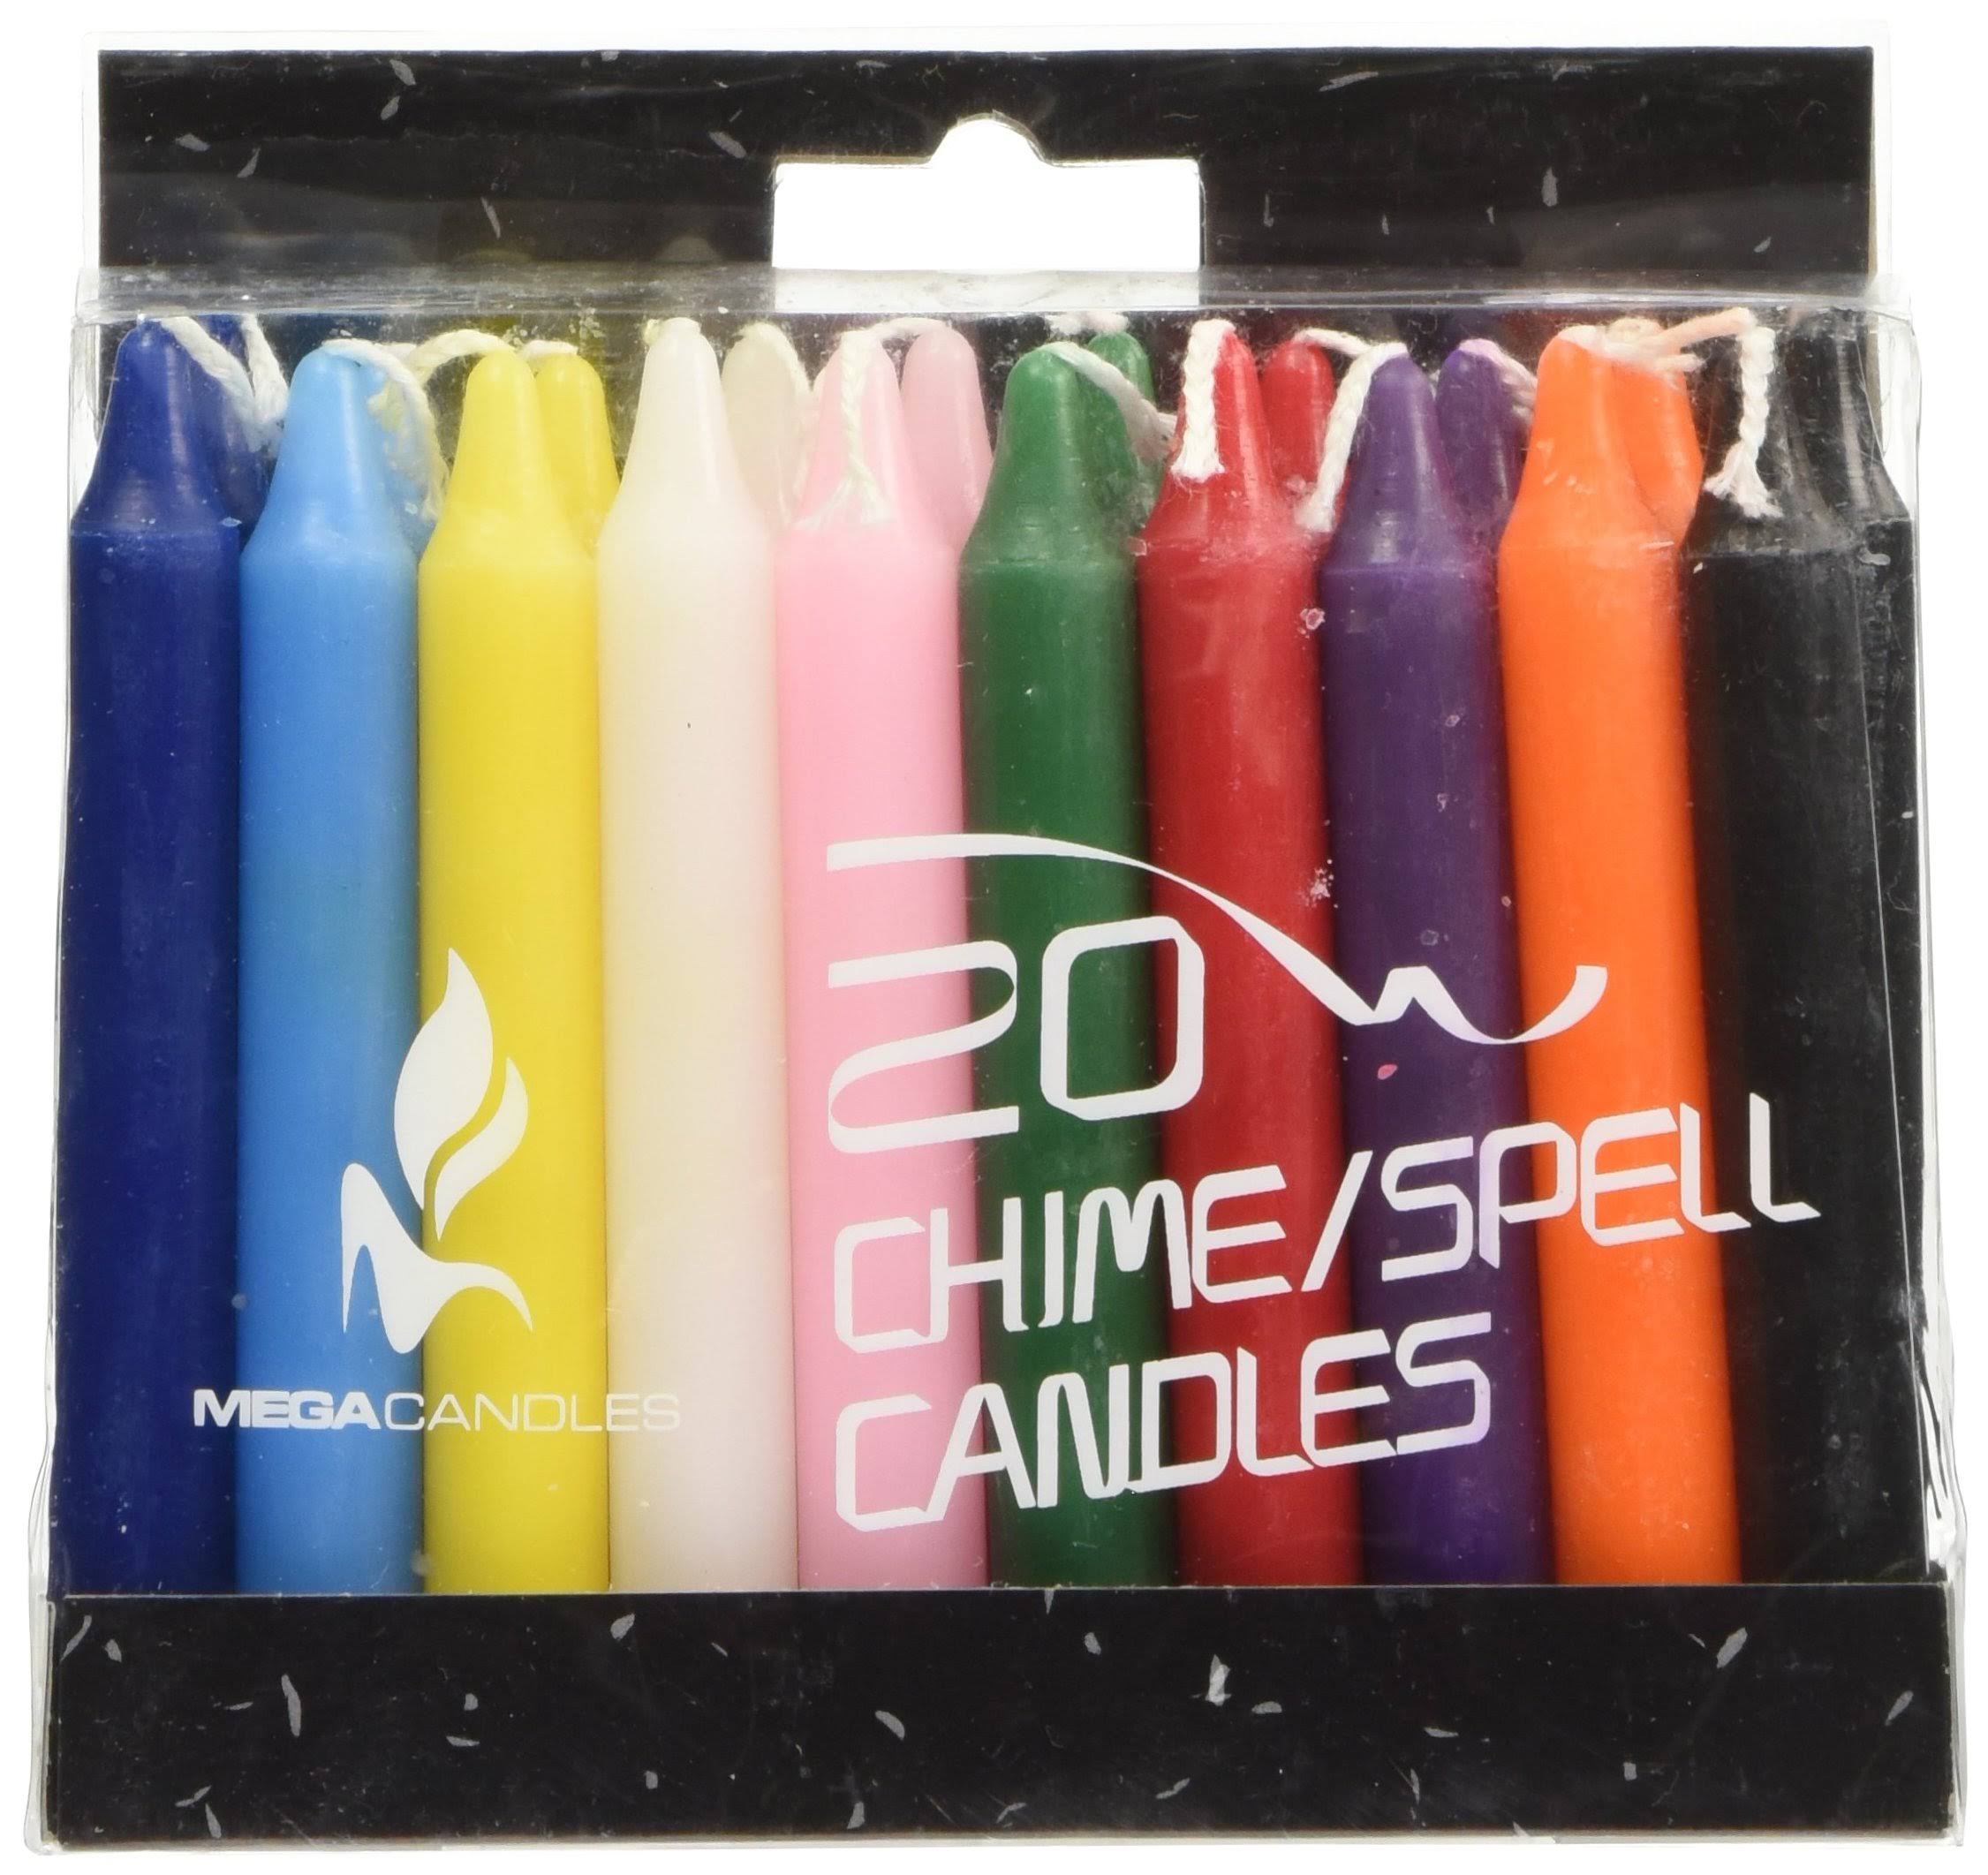 Mega Candles 20 Pcs Unscented Assorted Colors Mini Taper Candle, 4 Inch Tall x